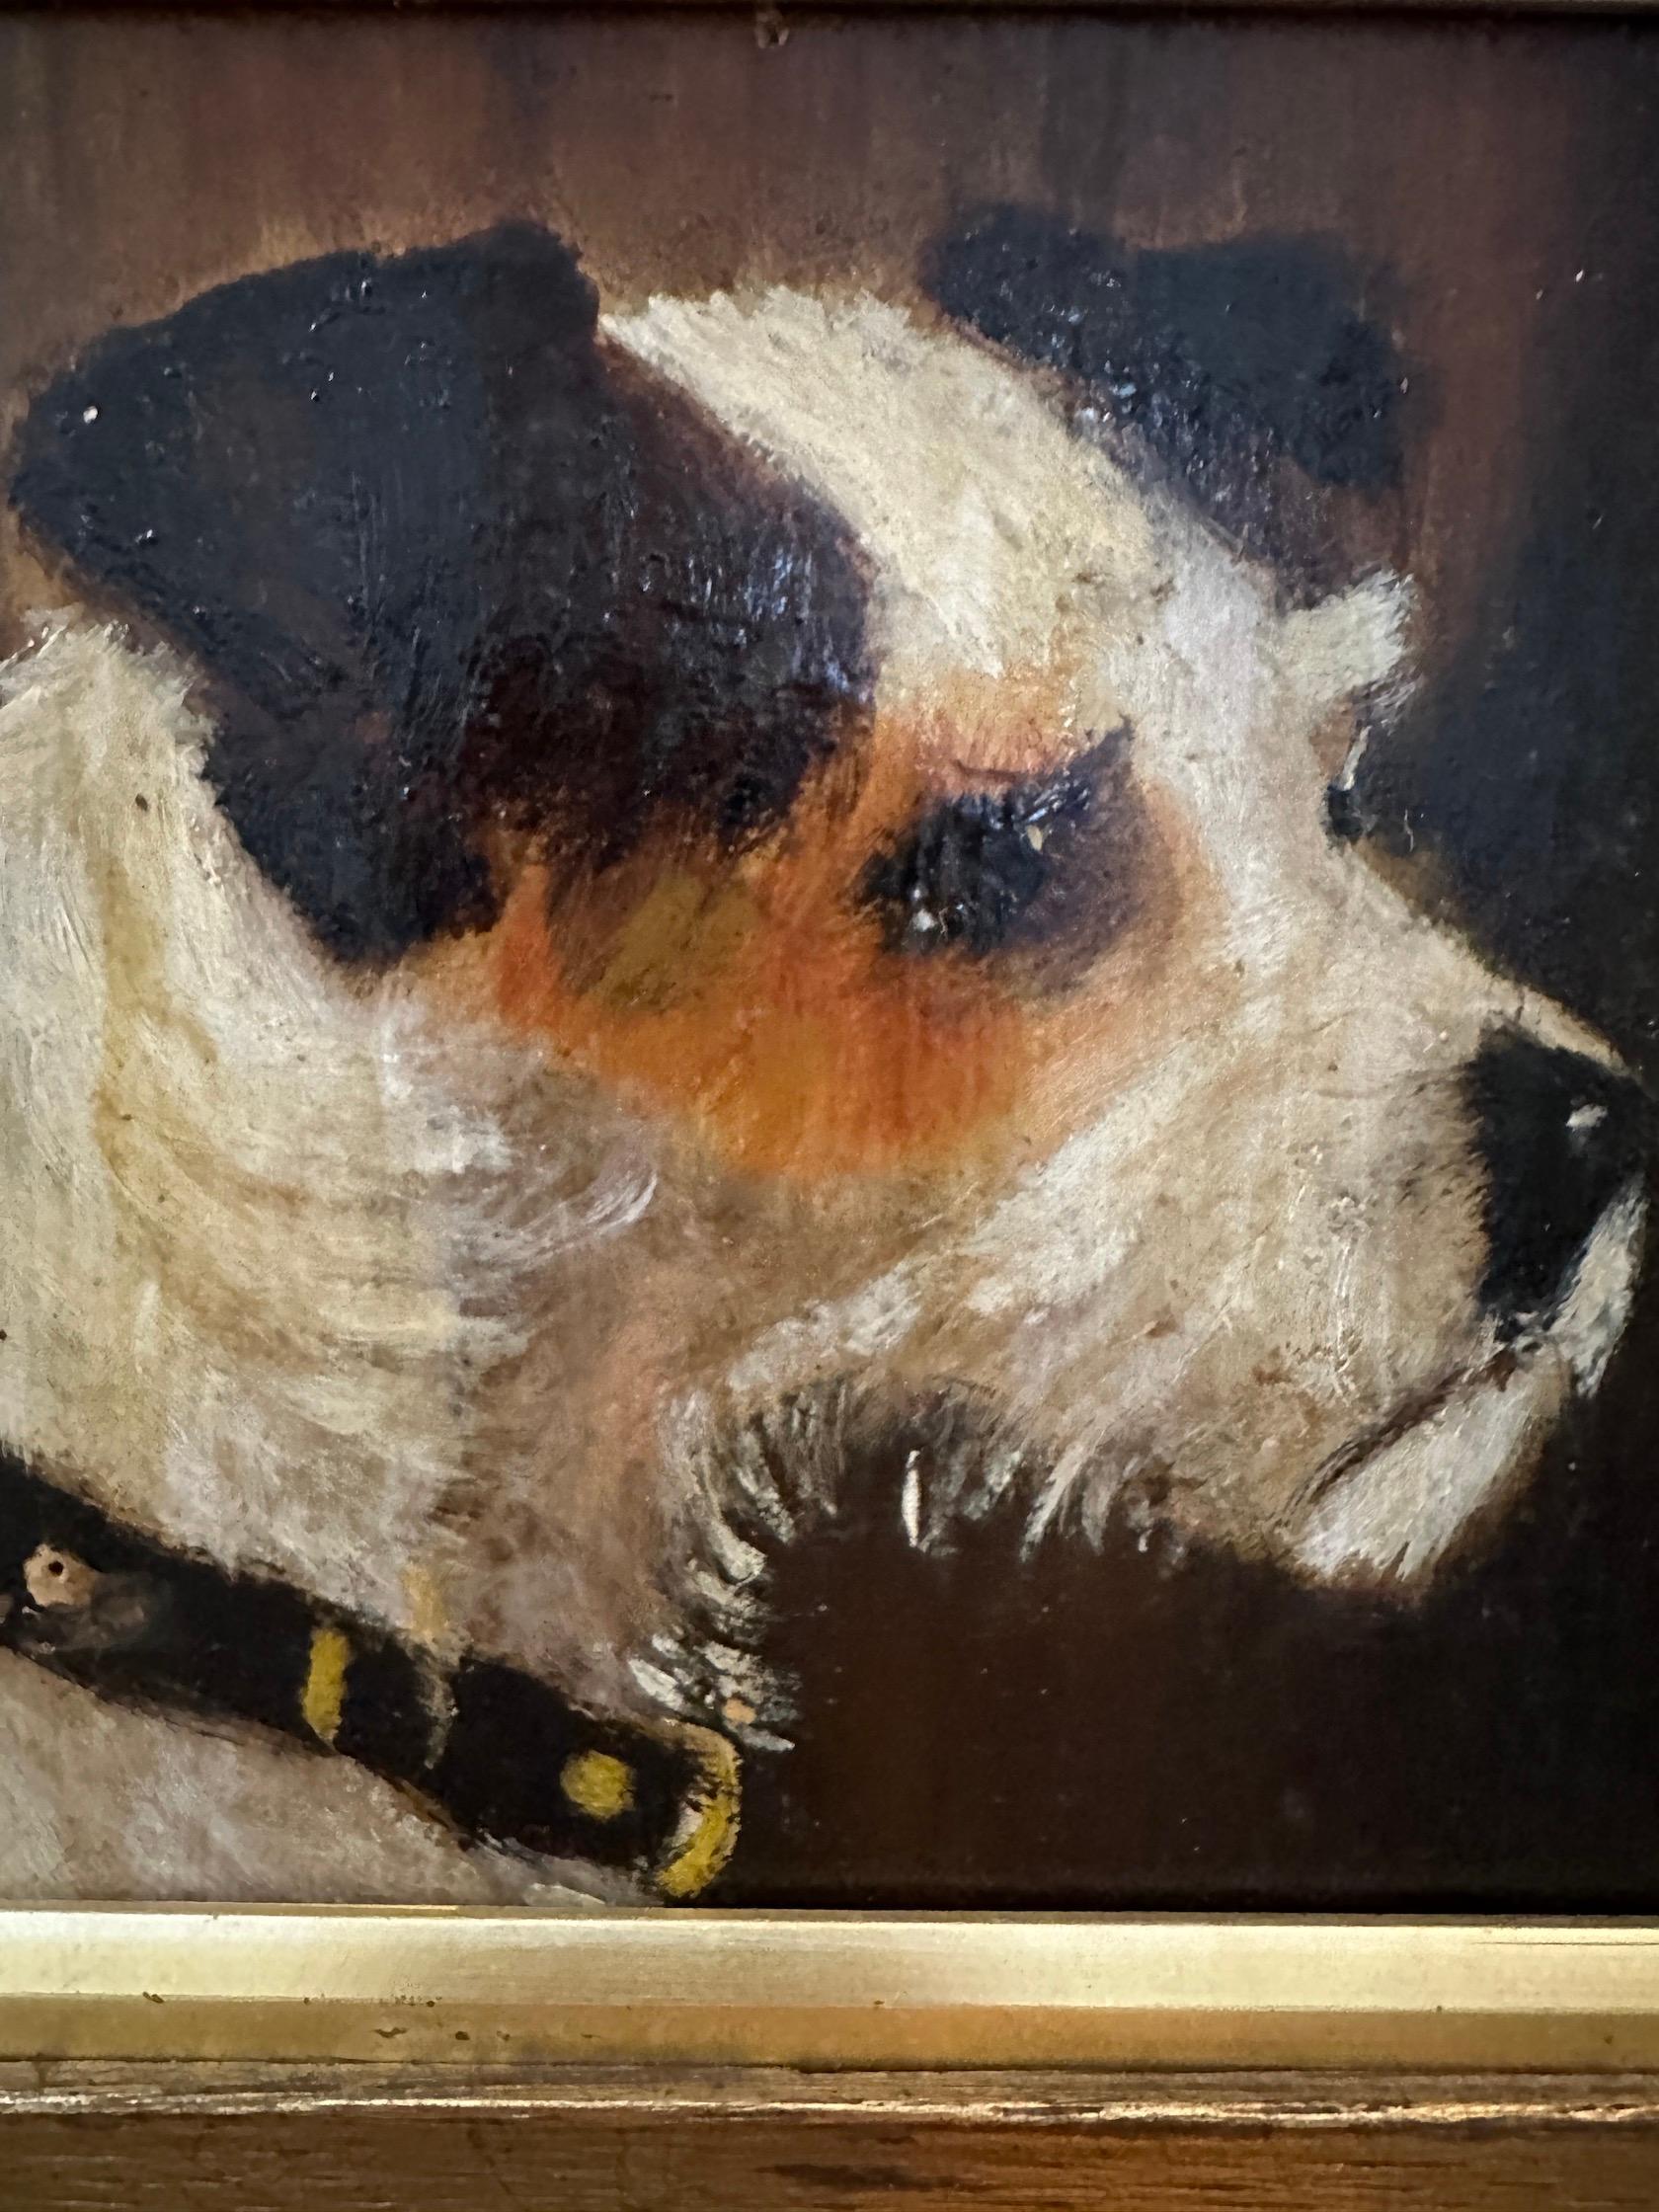 A. List , 19th century English portrait of a Jack Russell dog or Puppy

Original English antique 19th century gilded oak  frame and the painting is in perfect original condition. 

A. List was a Victorian painter of animal subjects. 

He mostly